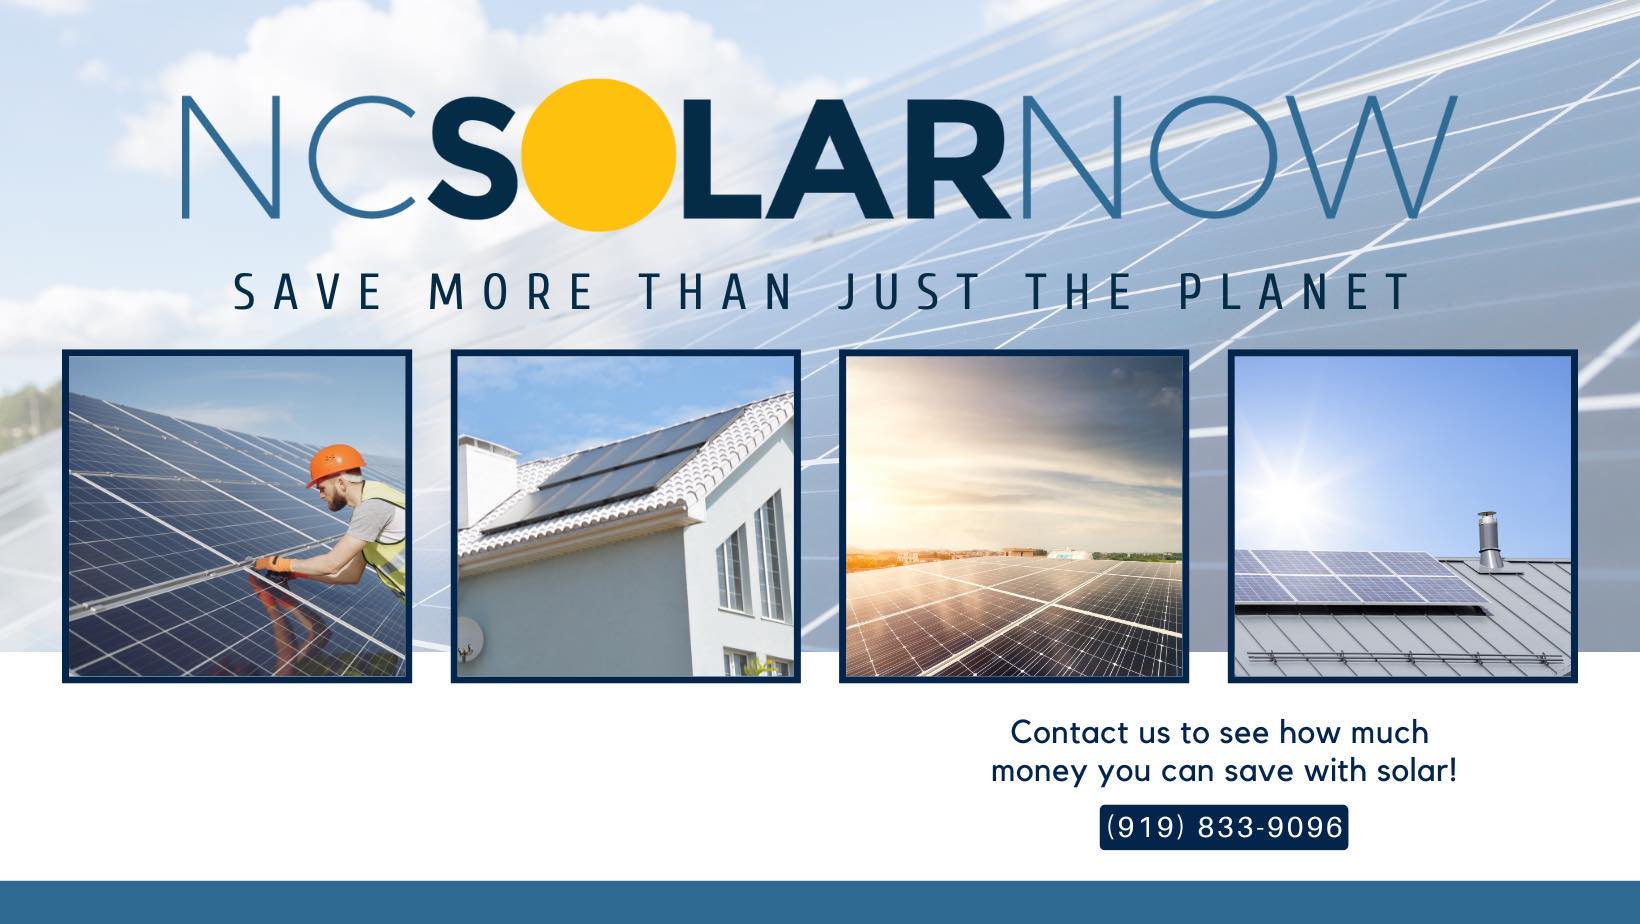 NC Solar Now featured image